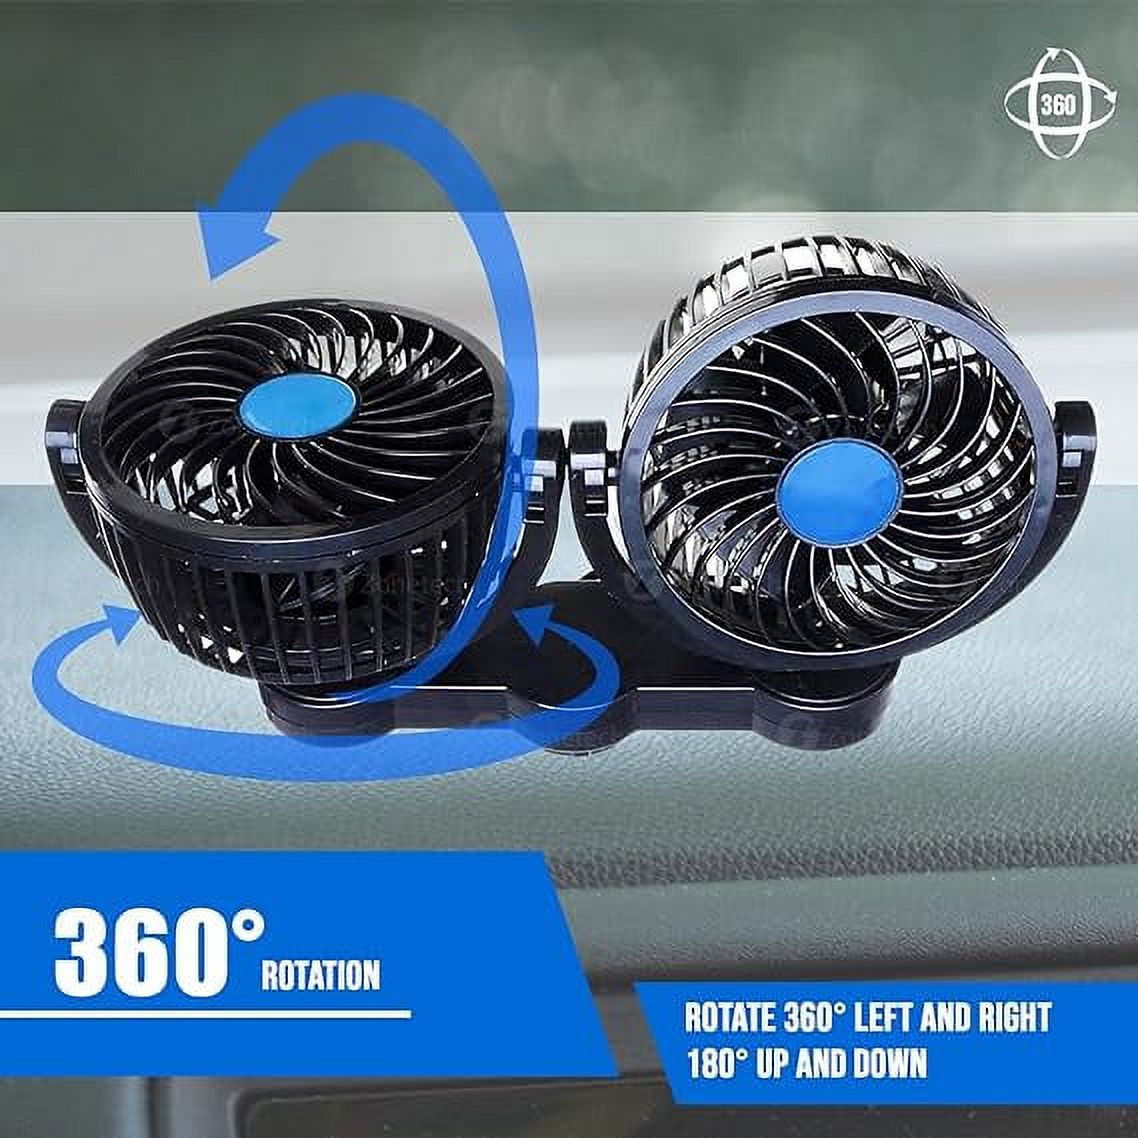 Car Cooling Air Fan 12V- Zone Tech 12V Dual Head Car Auto Electric Cooling Air Fan for Rear Seat - Powerful Quiet 2 Speed 360 Degree Rotatable 12V Ventilation Rear Seat with Kids Safe Design - image 5 of 5